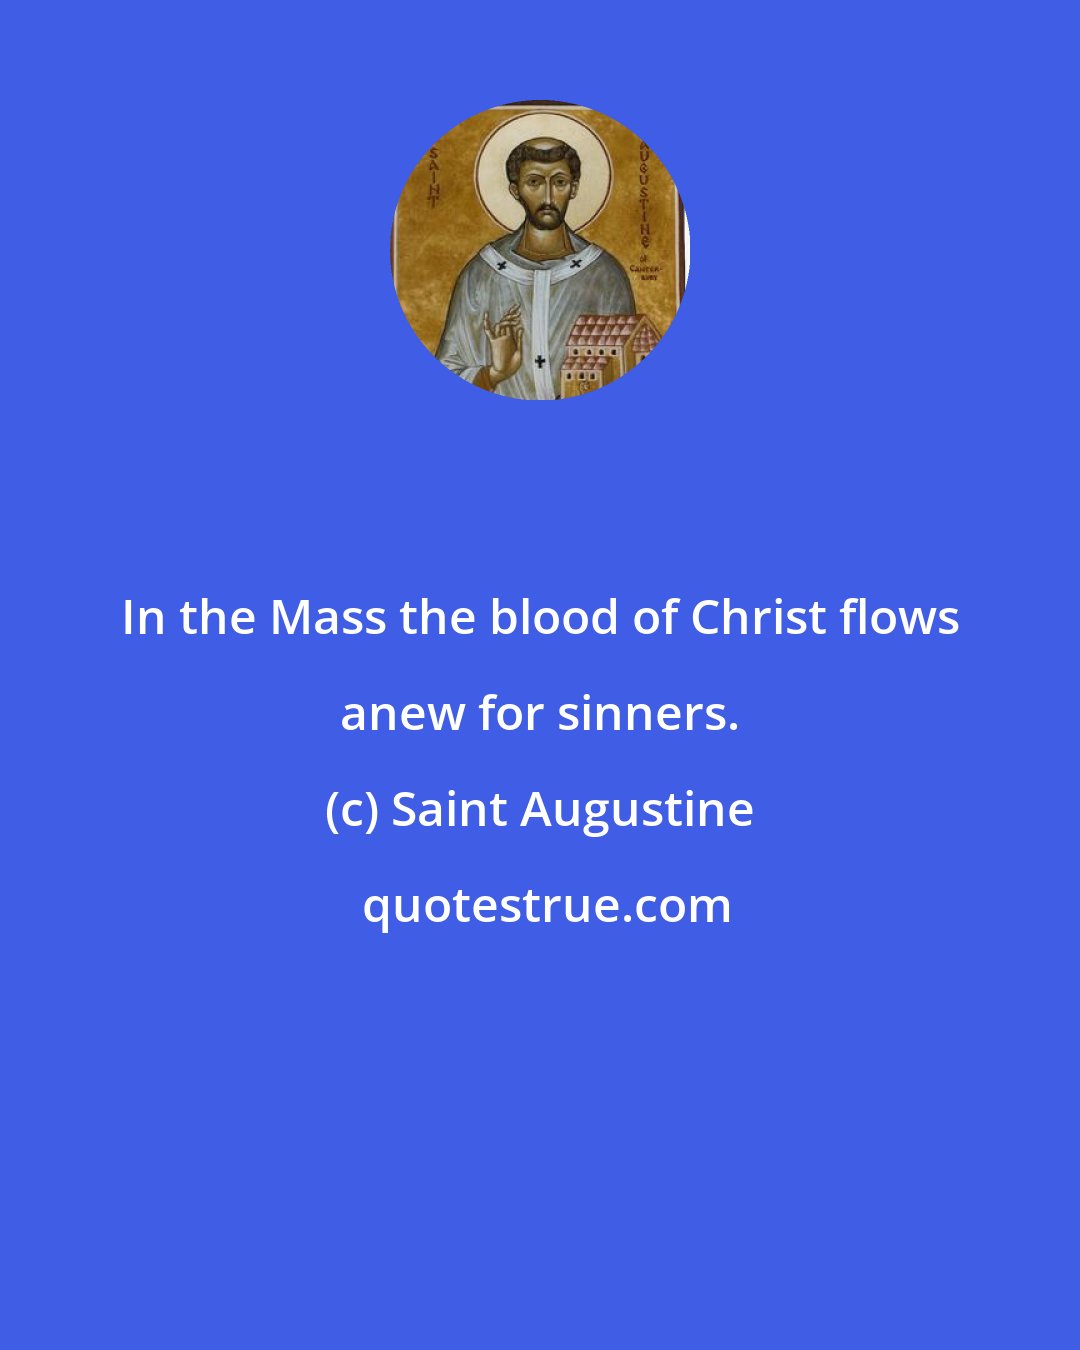 Saint Augustine: In the Mass the blood of Christ flows anew for sinners.